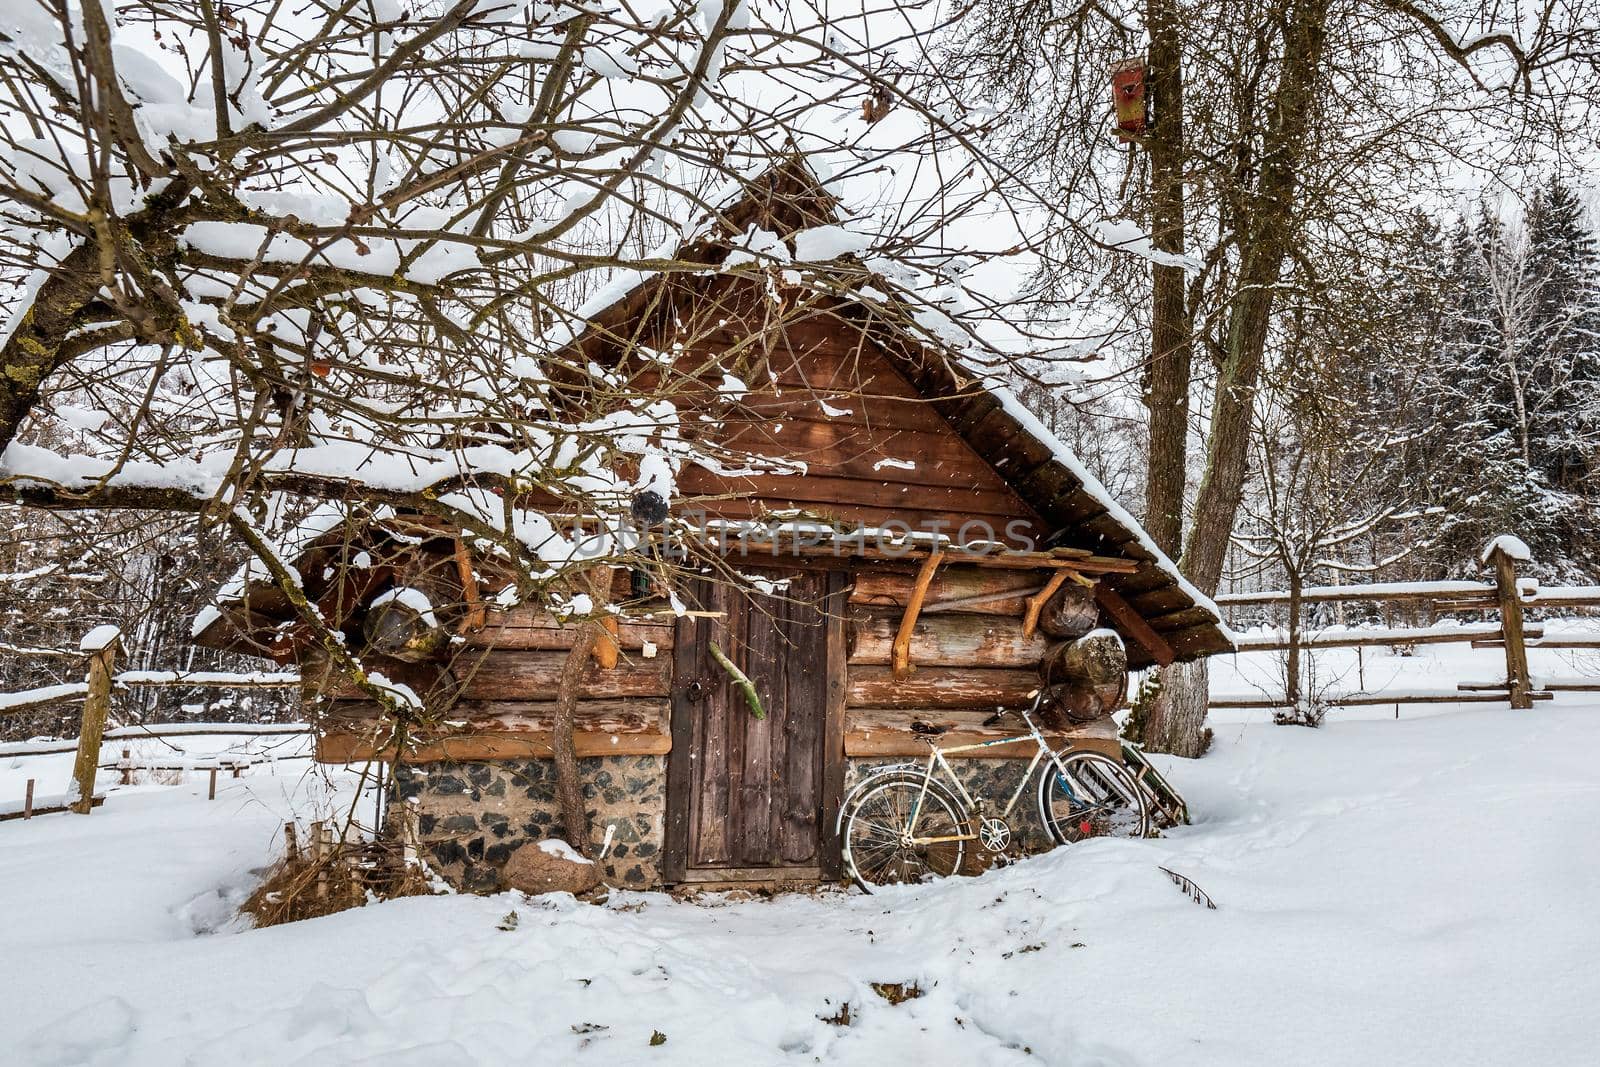 Decorated wooden house with textured wall and bycicle covered with a heavy snow in the village in Belarus.